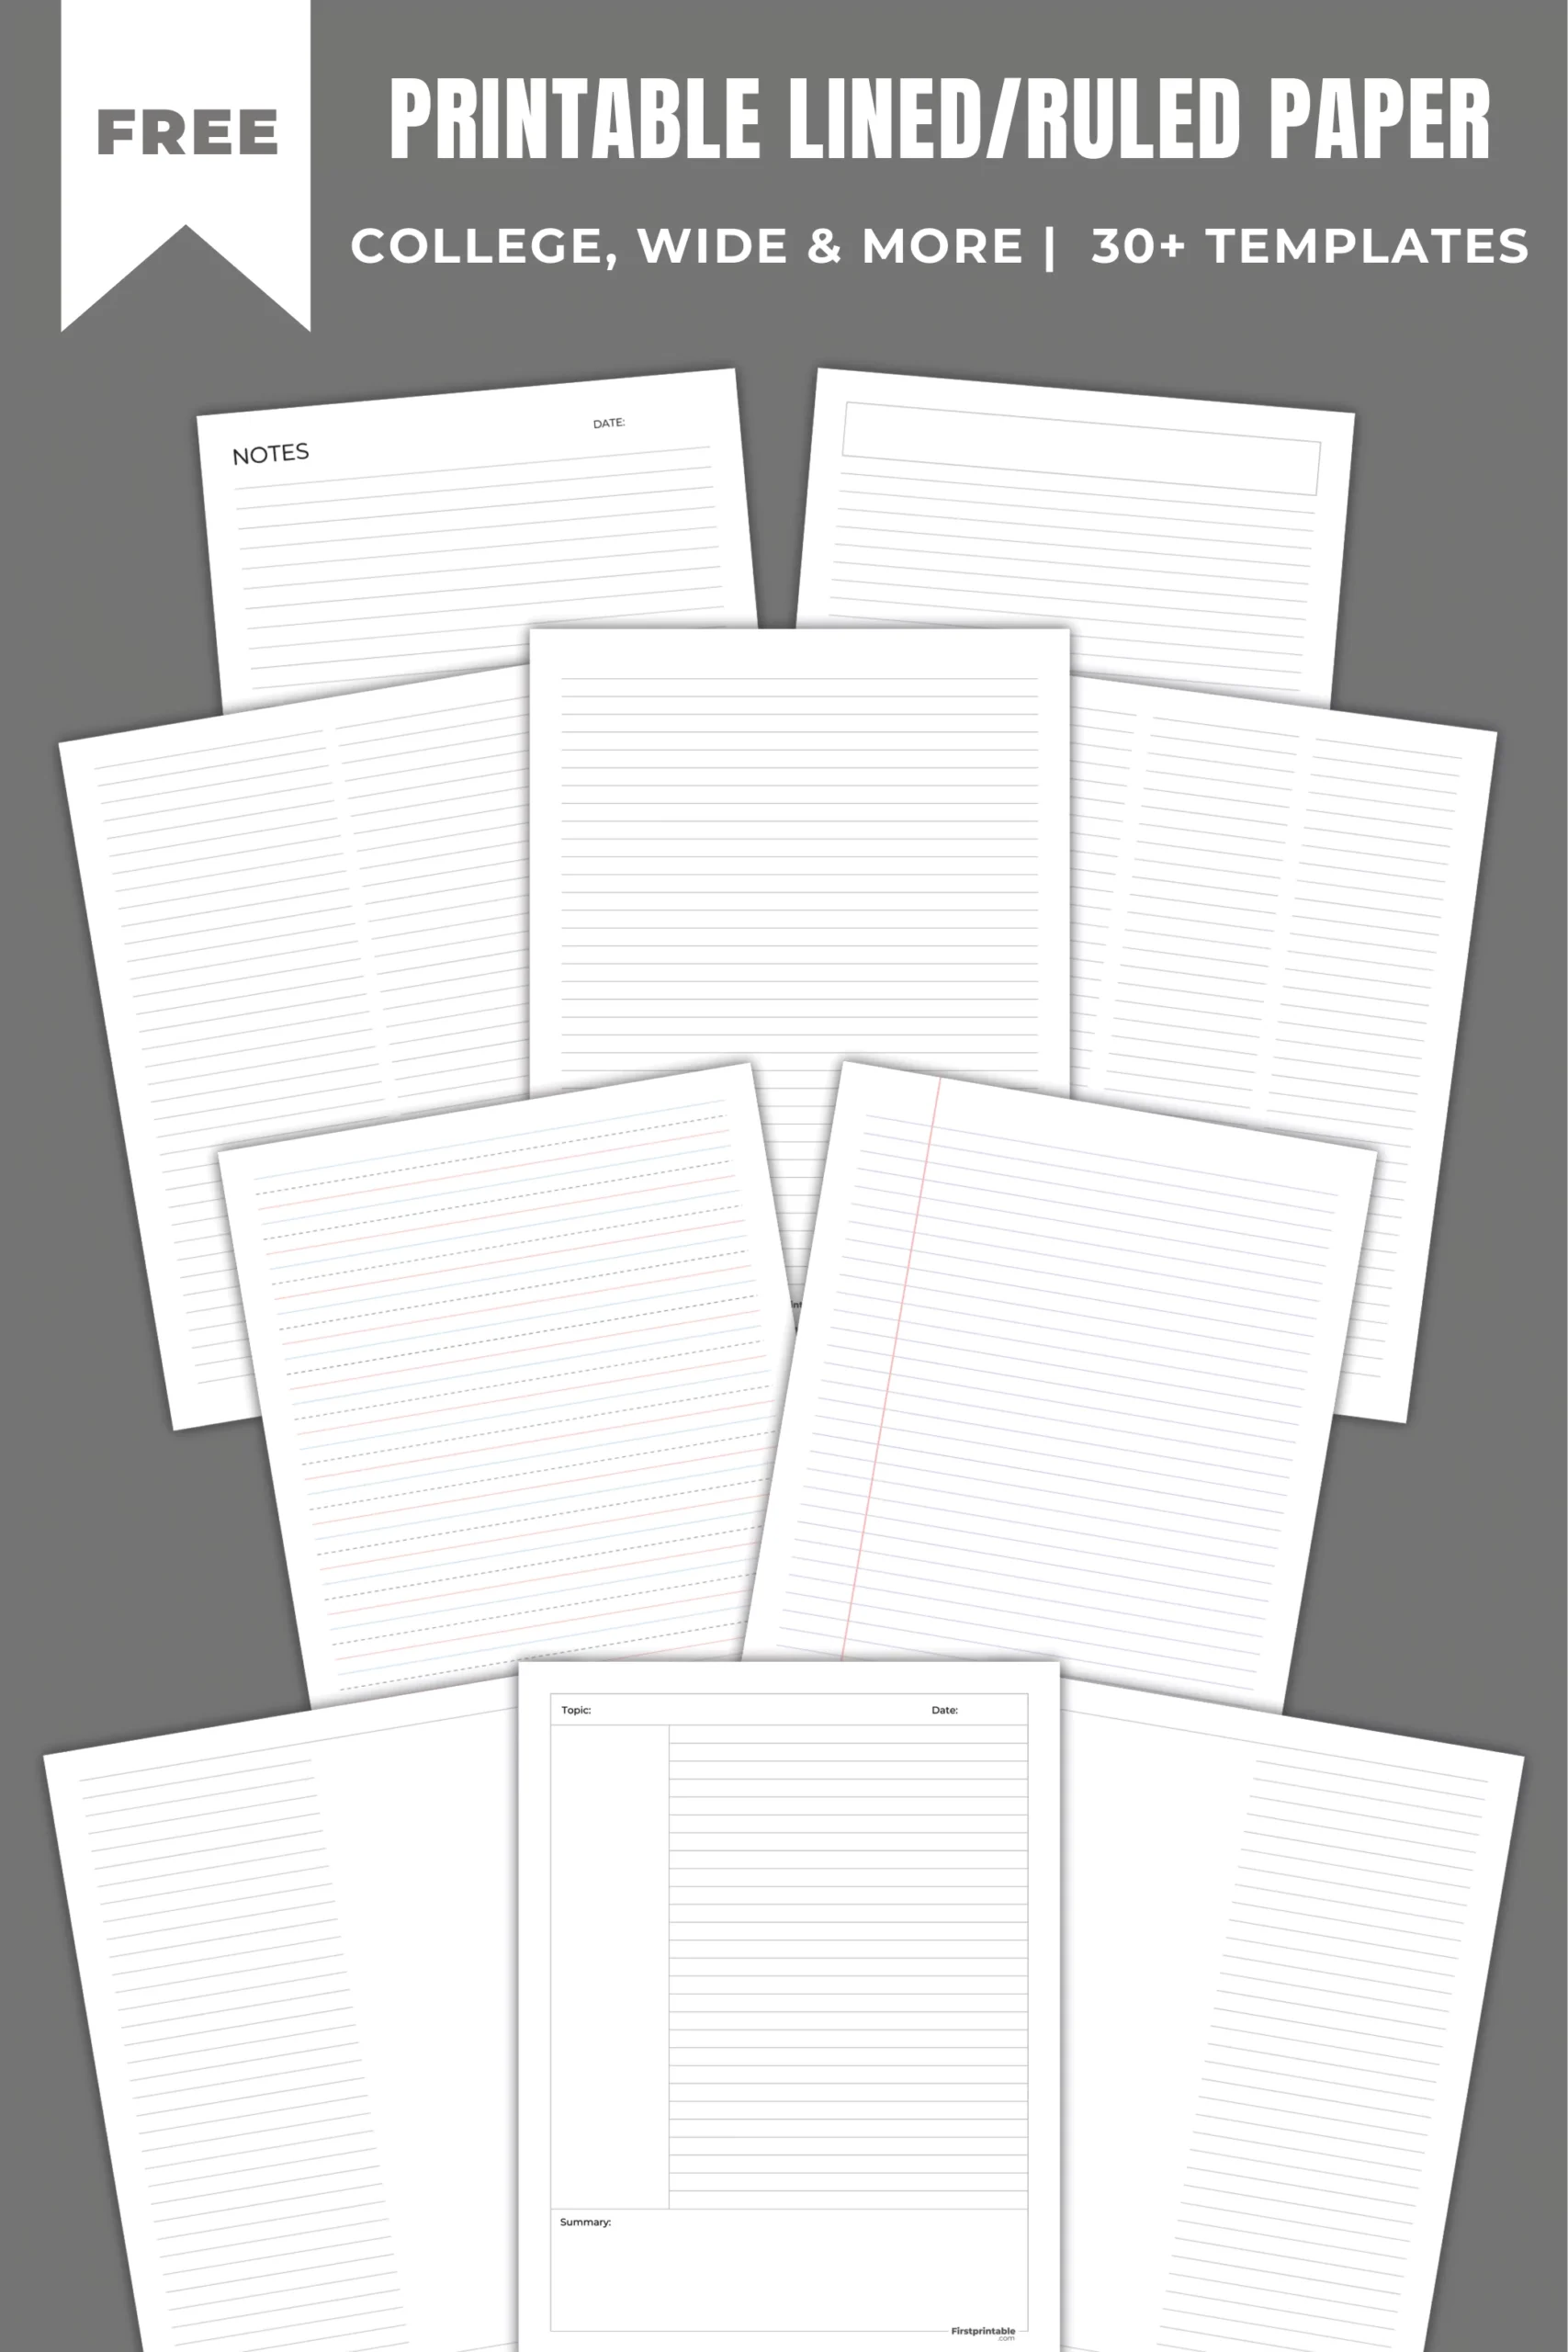 Printable lined paper | 30+ Free Templates